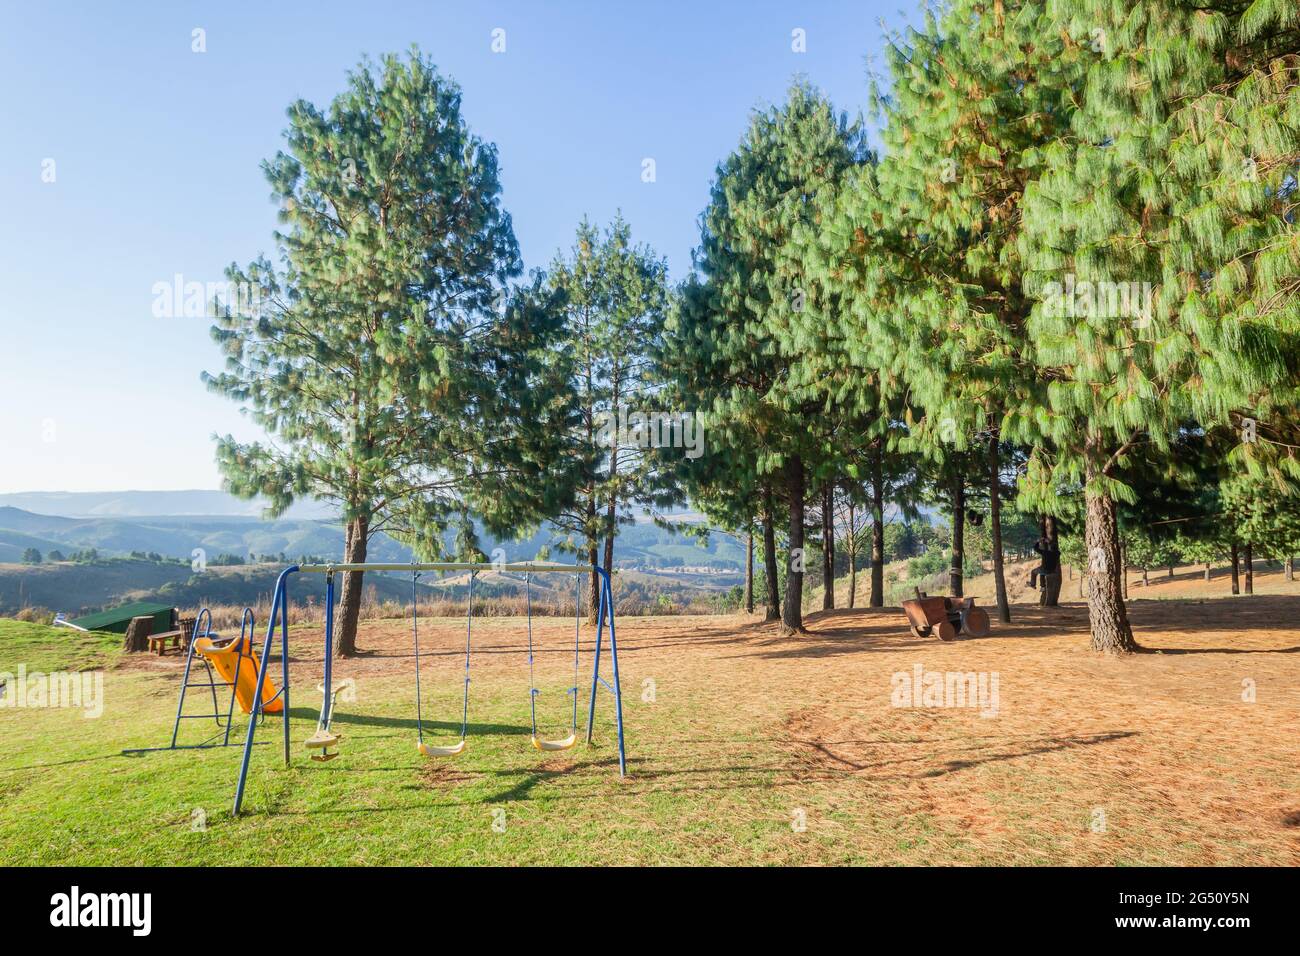 Childrens Playground Swings and Slide between pine trees in remote mountains wilderness for couple family holidays travels explore and hiking. Stock Photo